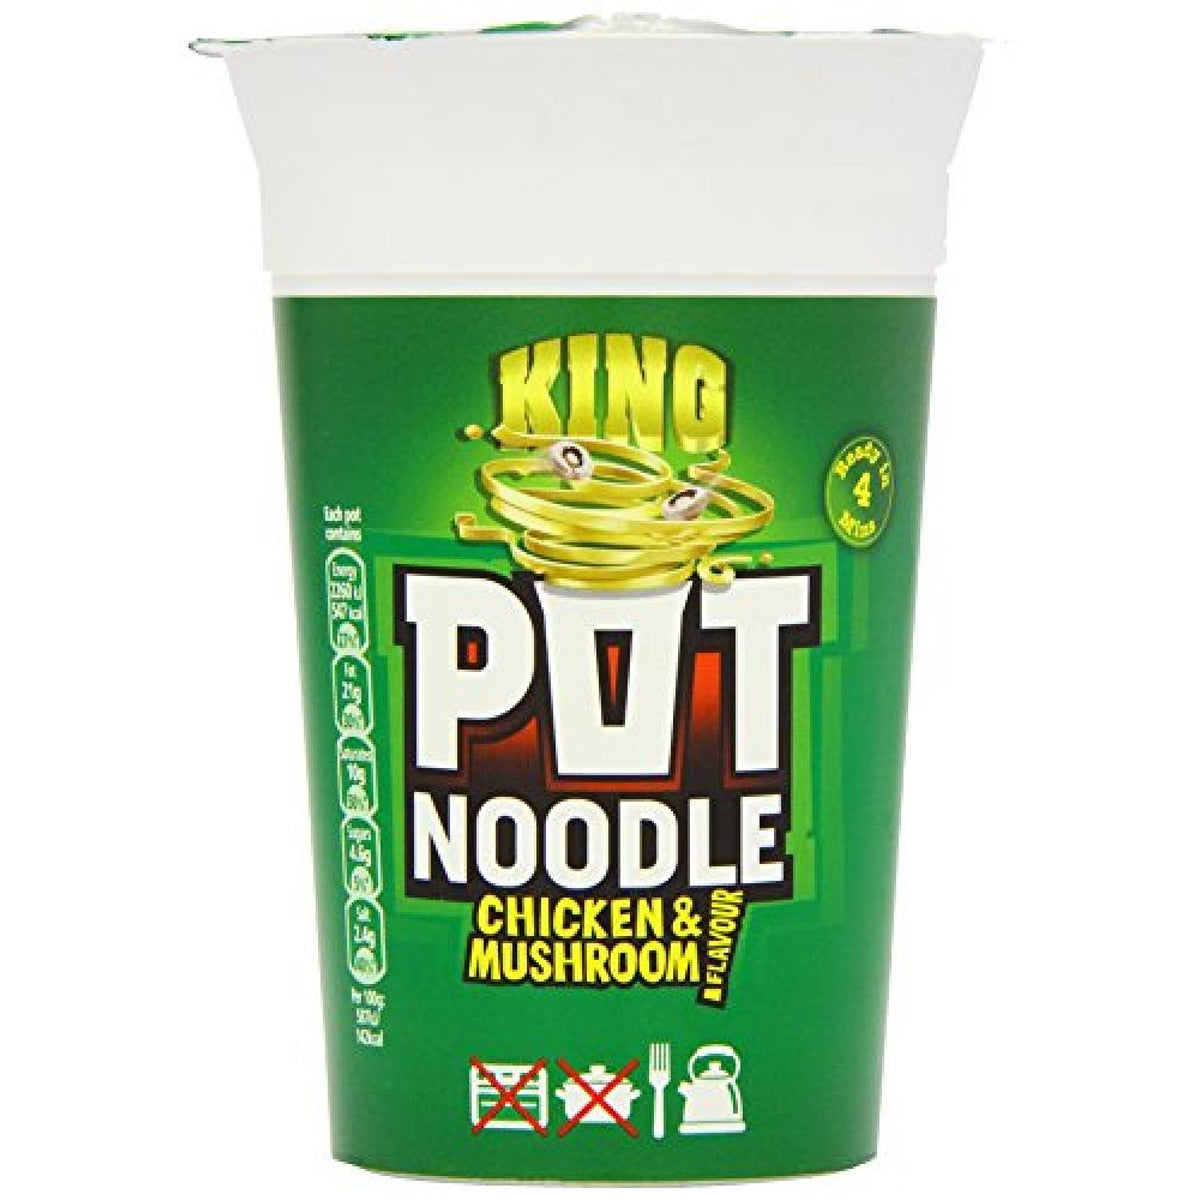 King Pot Noodle - Chicken And Mushroom - 114g - Continental Food Store